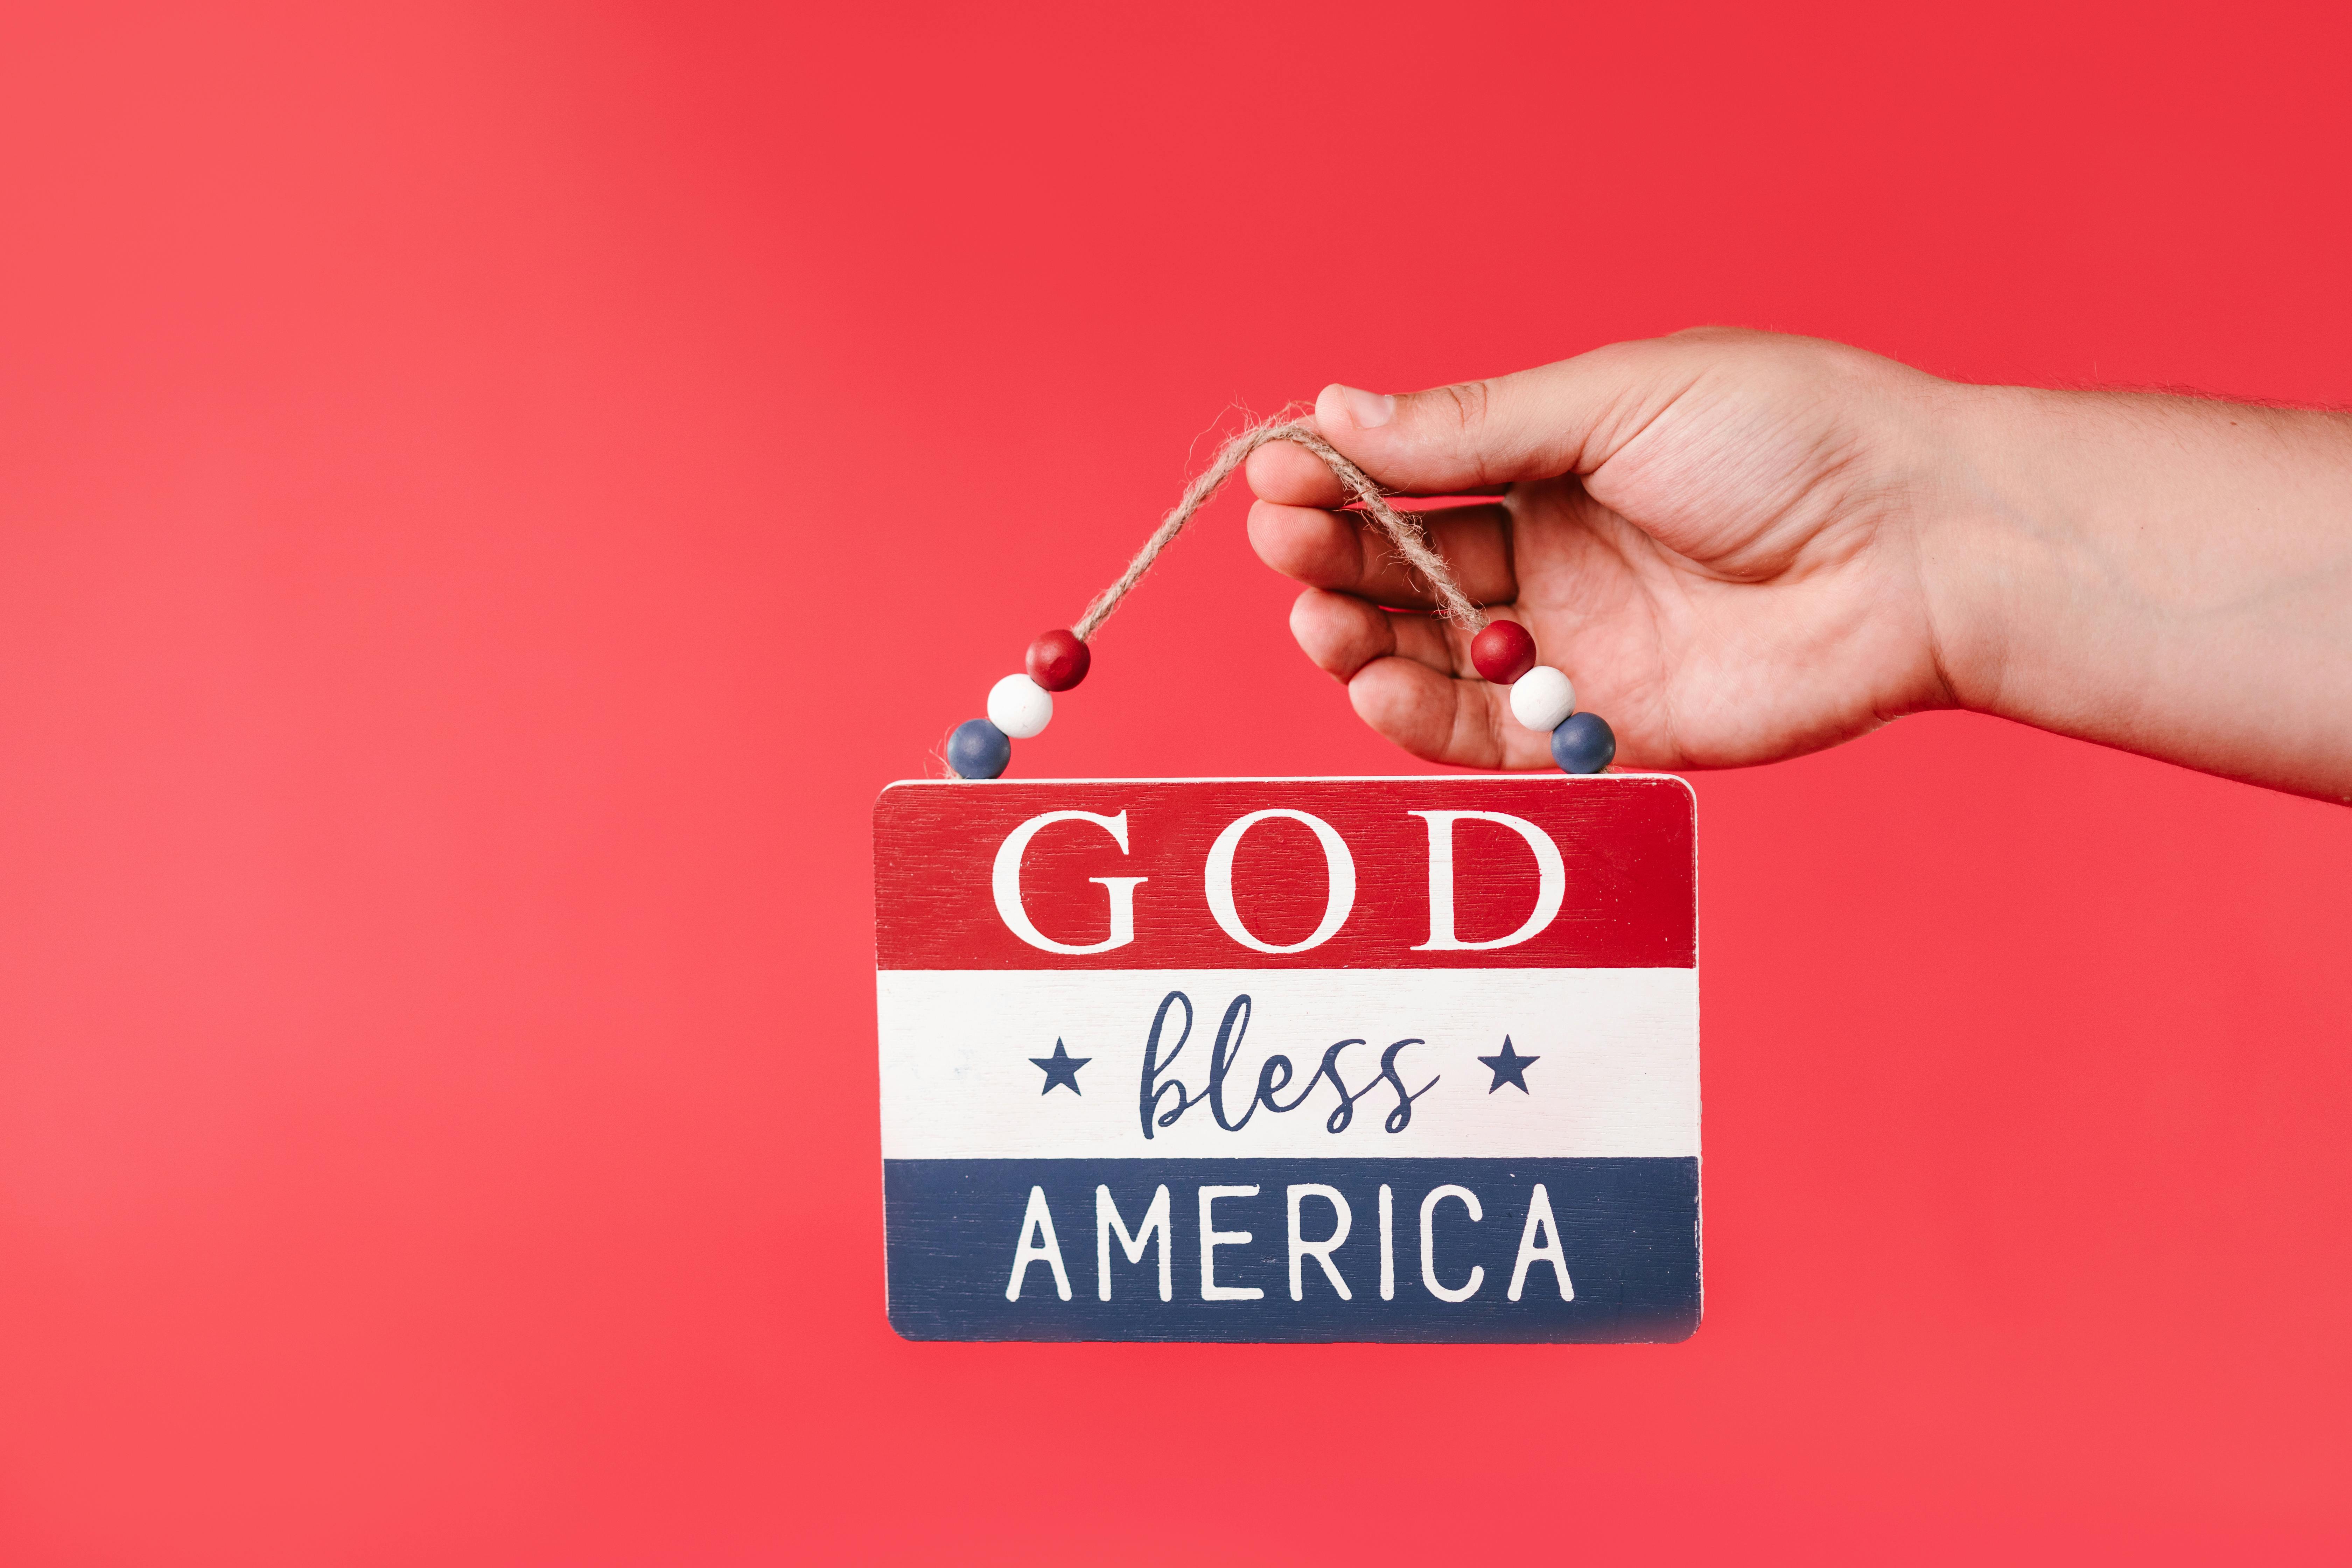 God Bless America wallpapers Movie HQ God Bless America pictures  4K  Wallpapers 2019